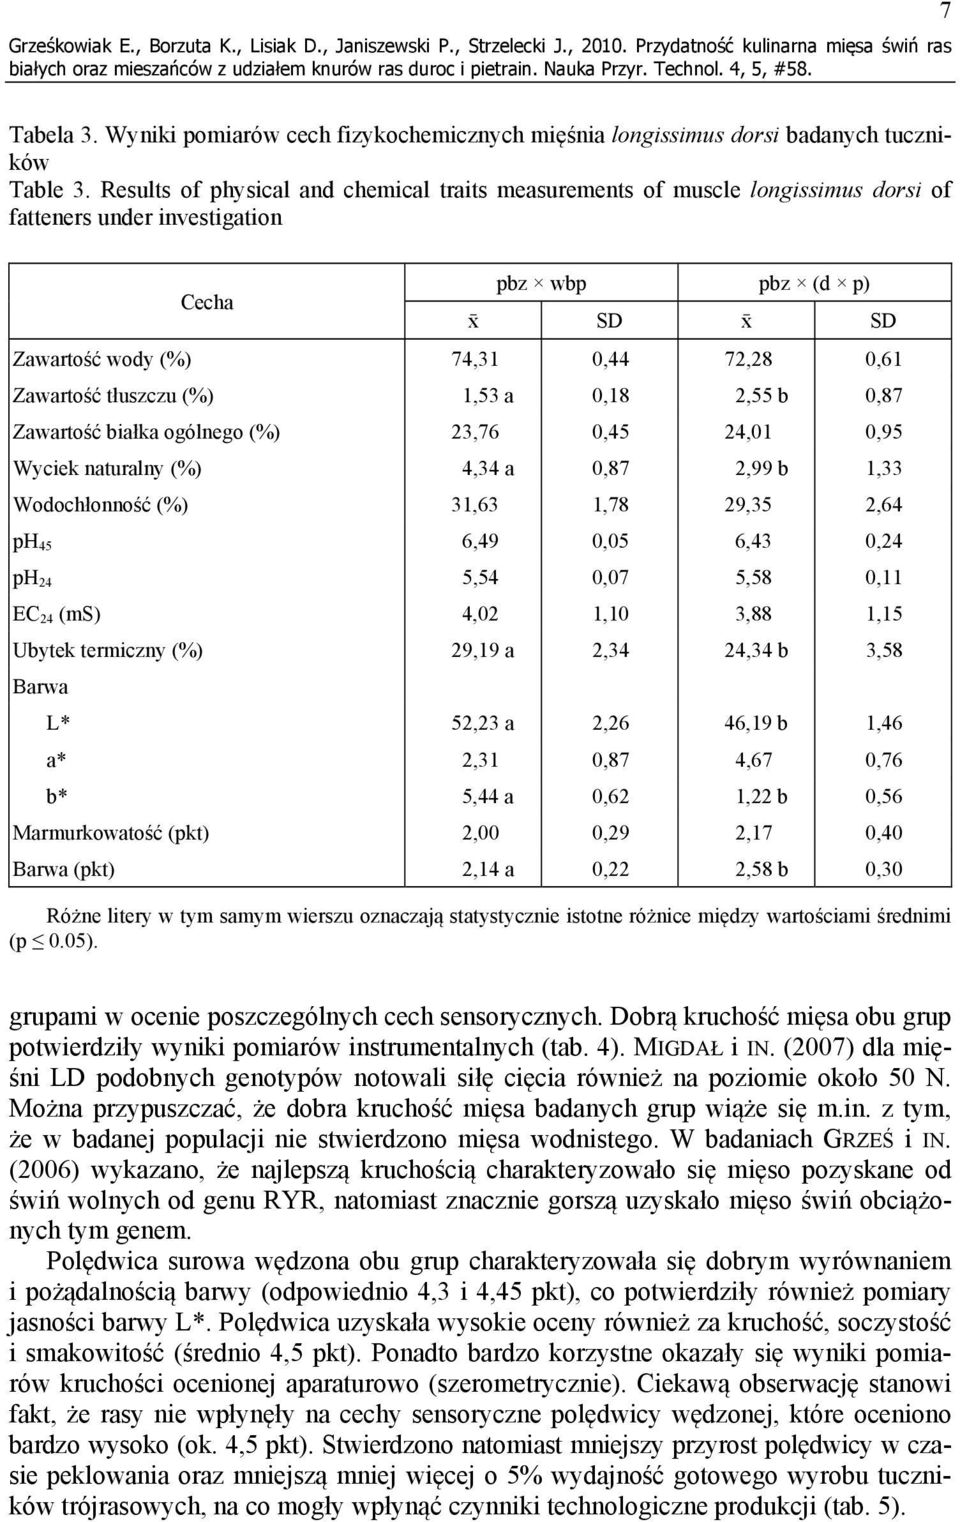 Results of physical and chemical traits measurements of muscle longissimus dorsi of fatteners under investigation Cecha pbz wbp pbz (d p) x SD x SD Zawartość wody (%) 74,31 0,44 72,28 0,61 Zawartość